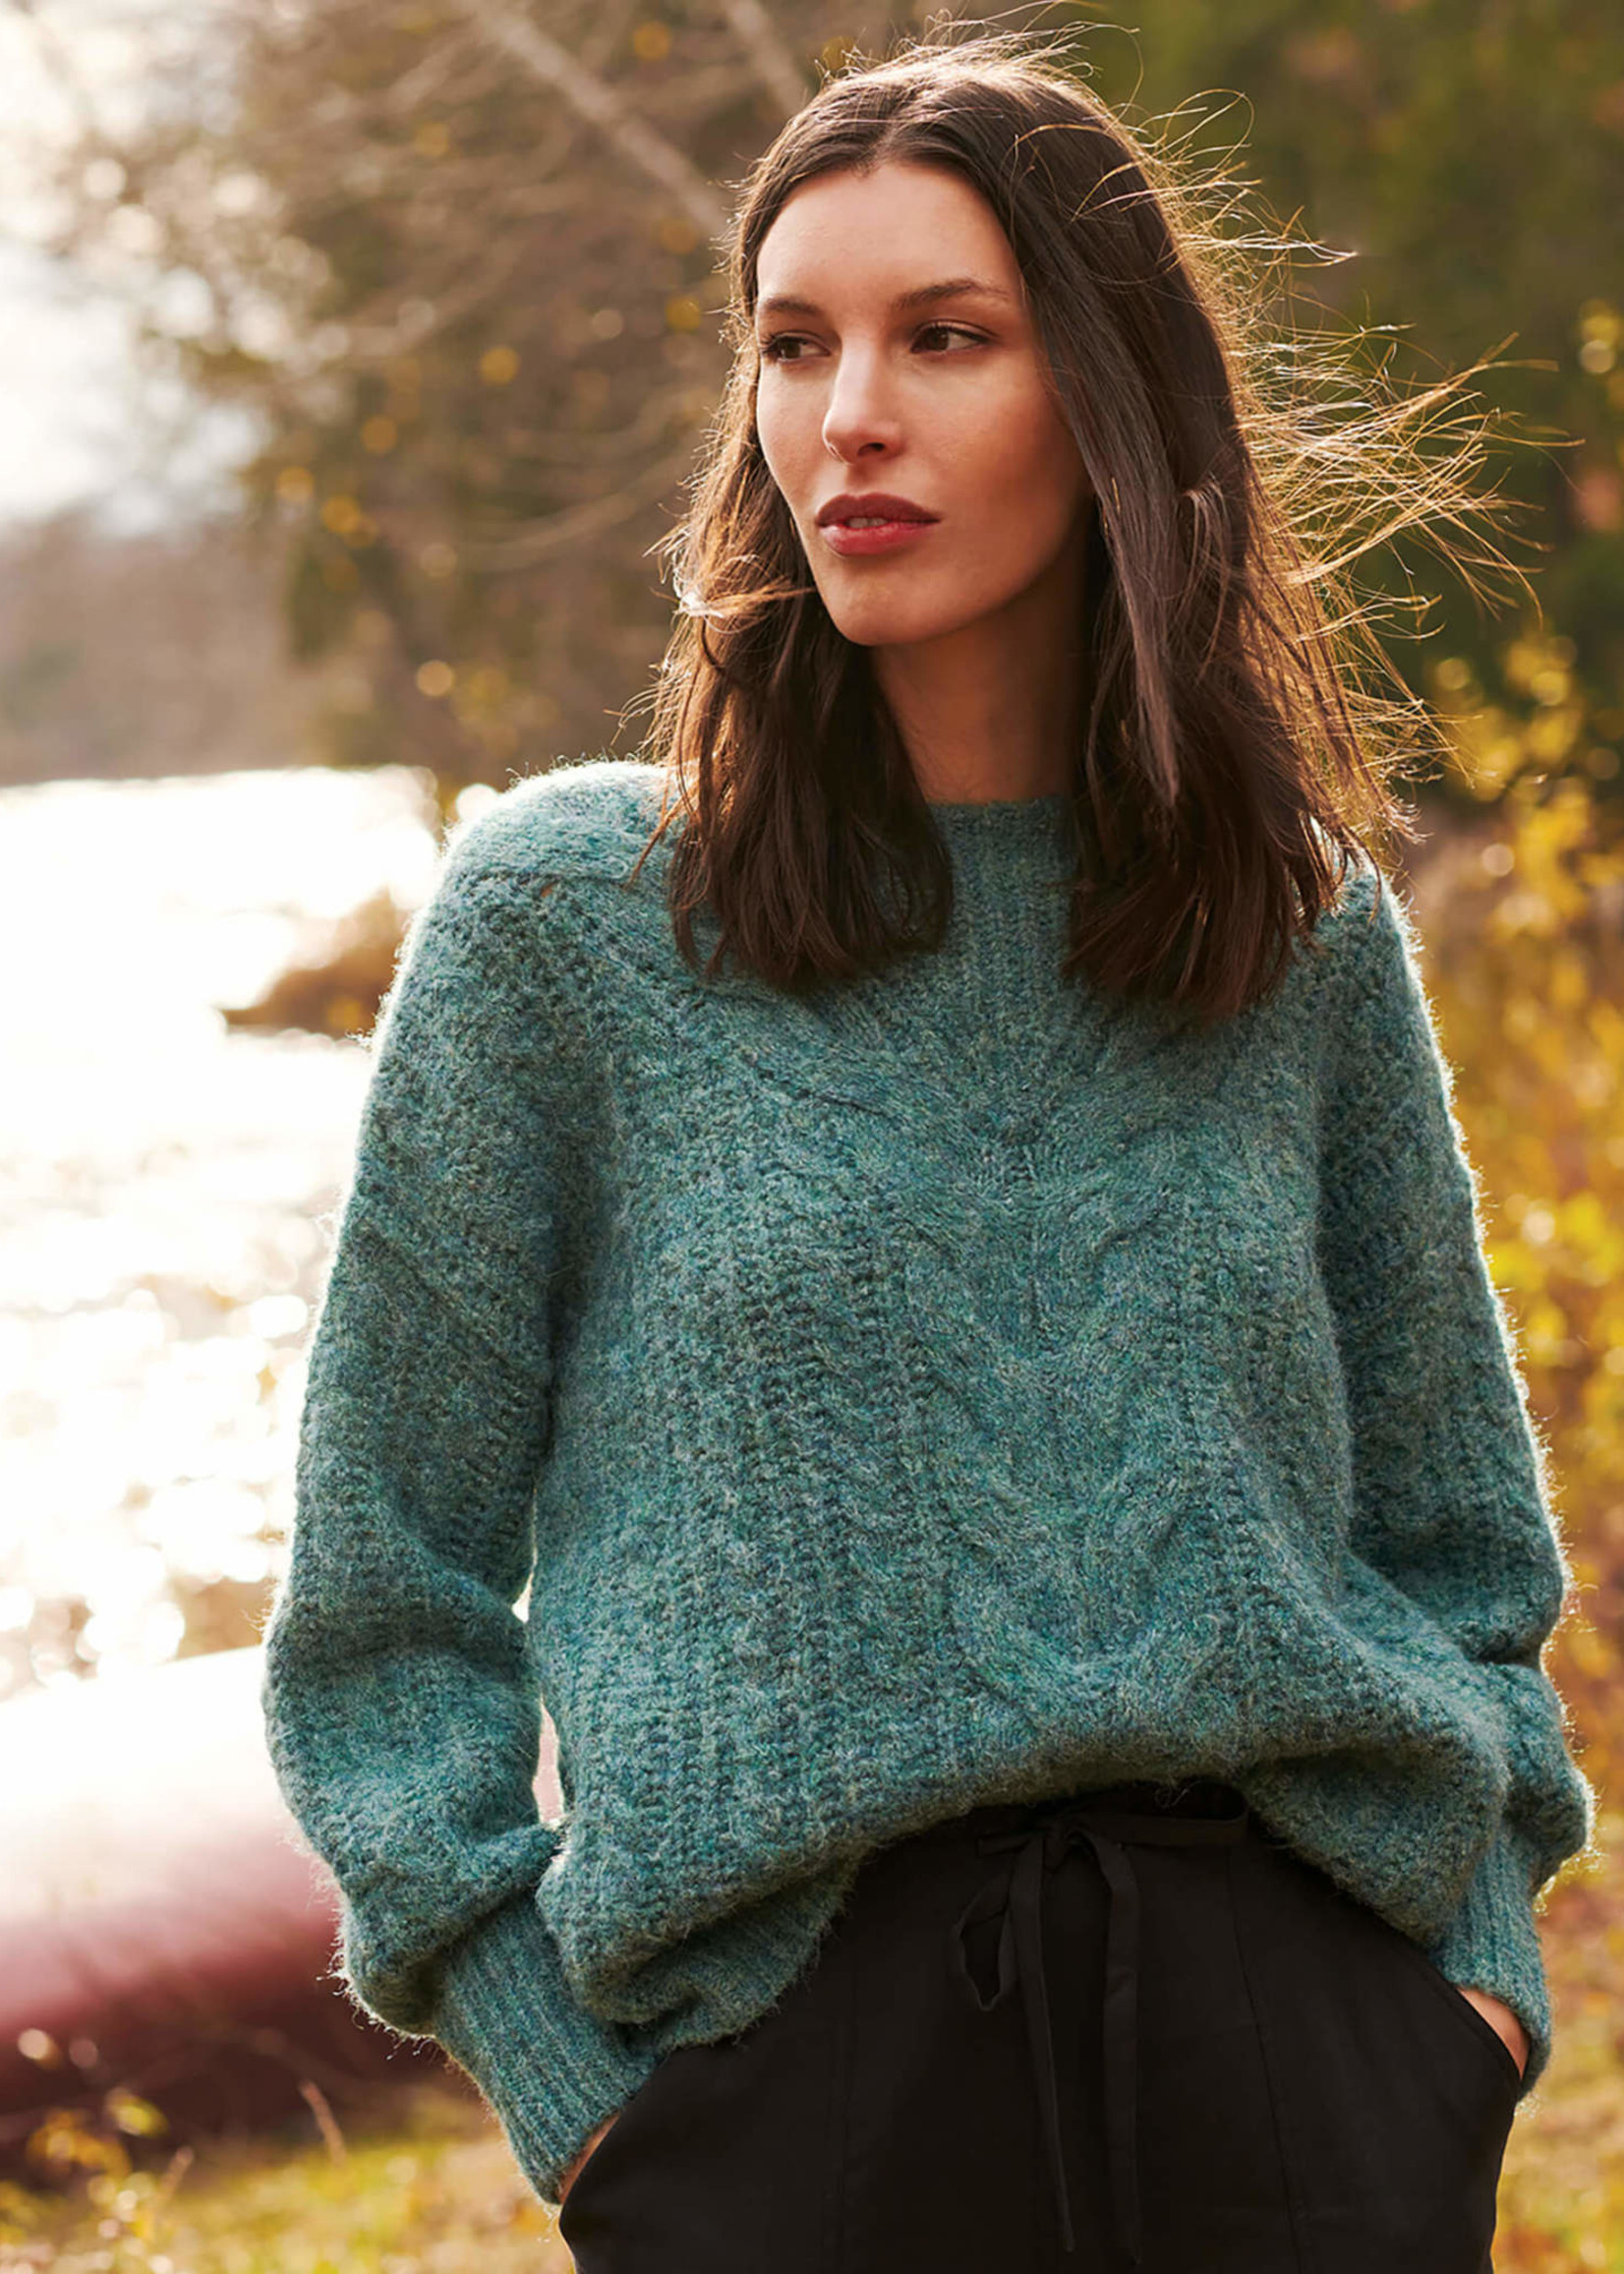 Hatley Cable Knit Pullover